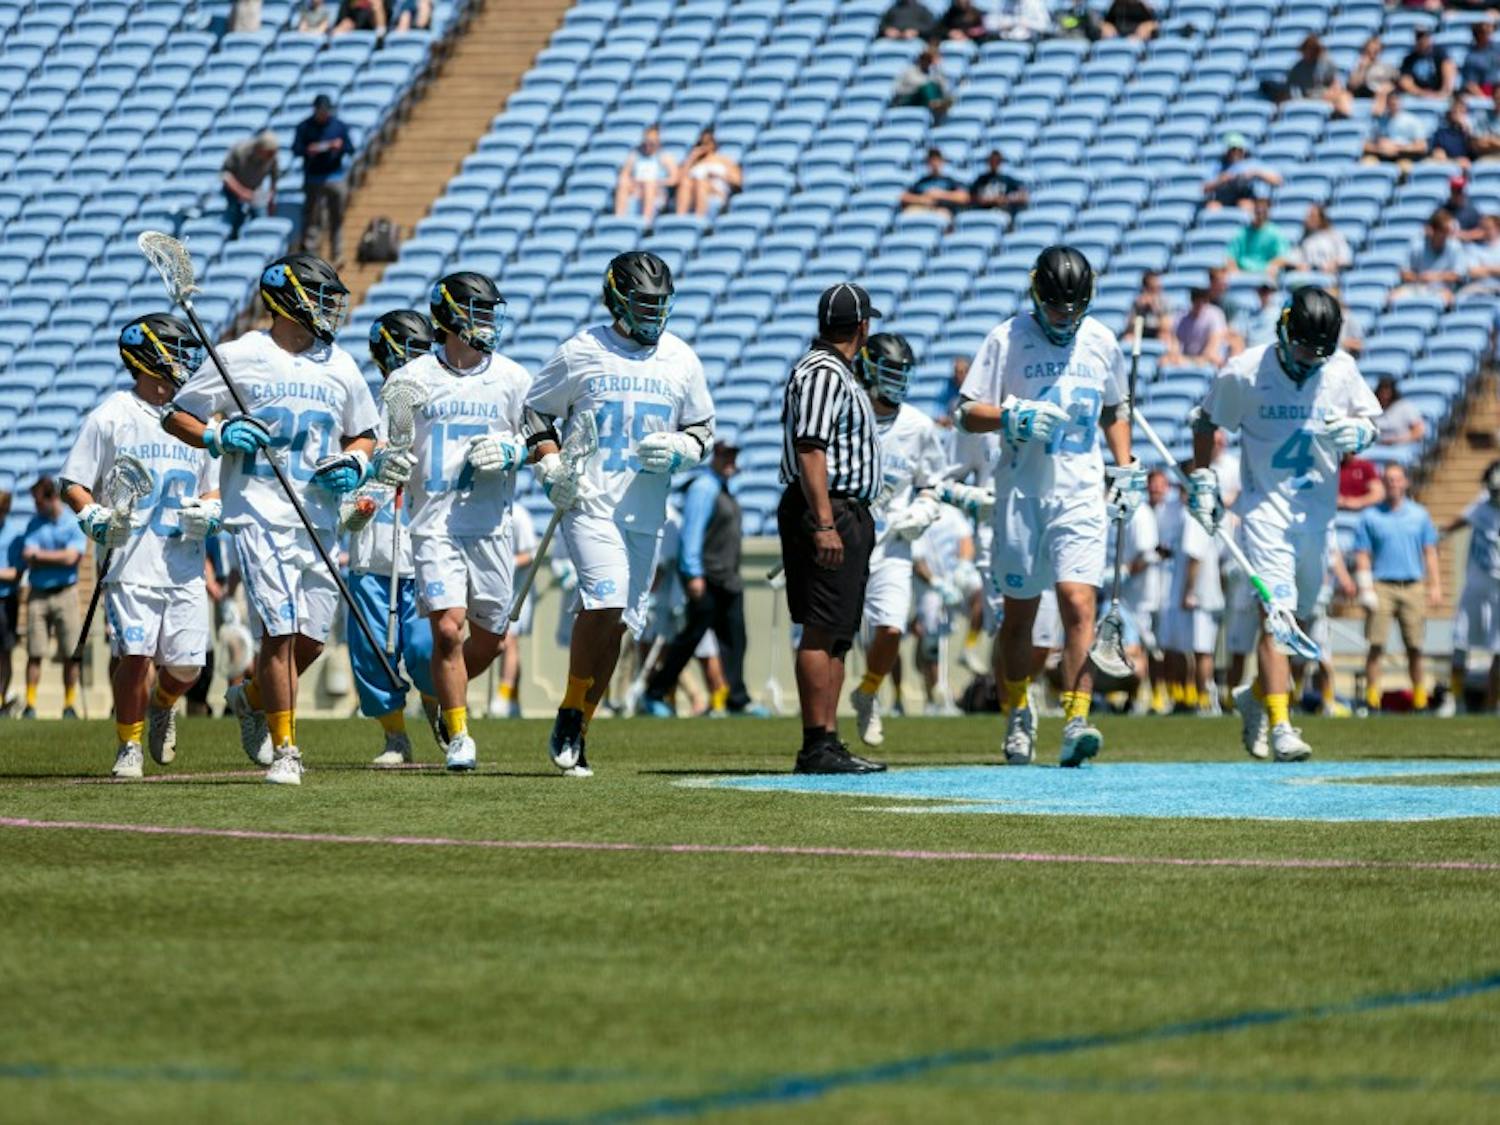 The men's lacrosse team jogs onto Kenan Stadium's field ahead of its game against Notre Dame on April 20.